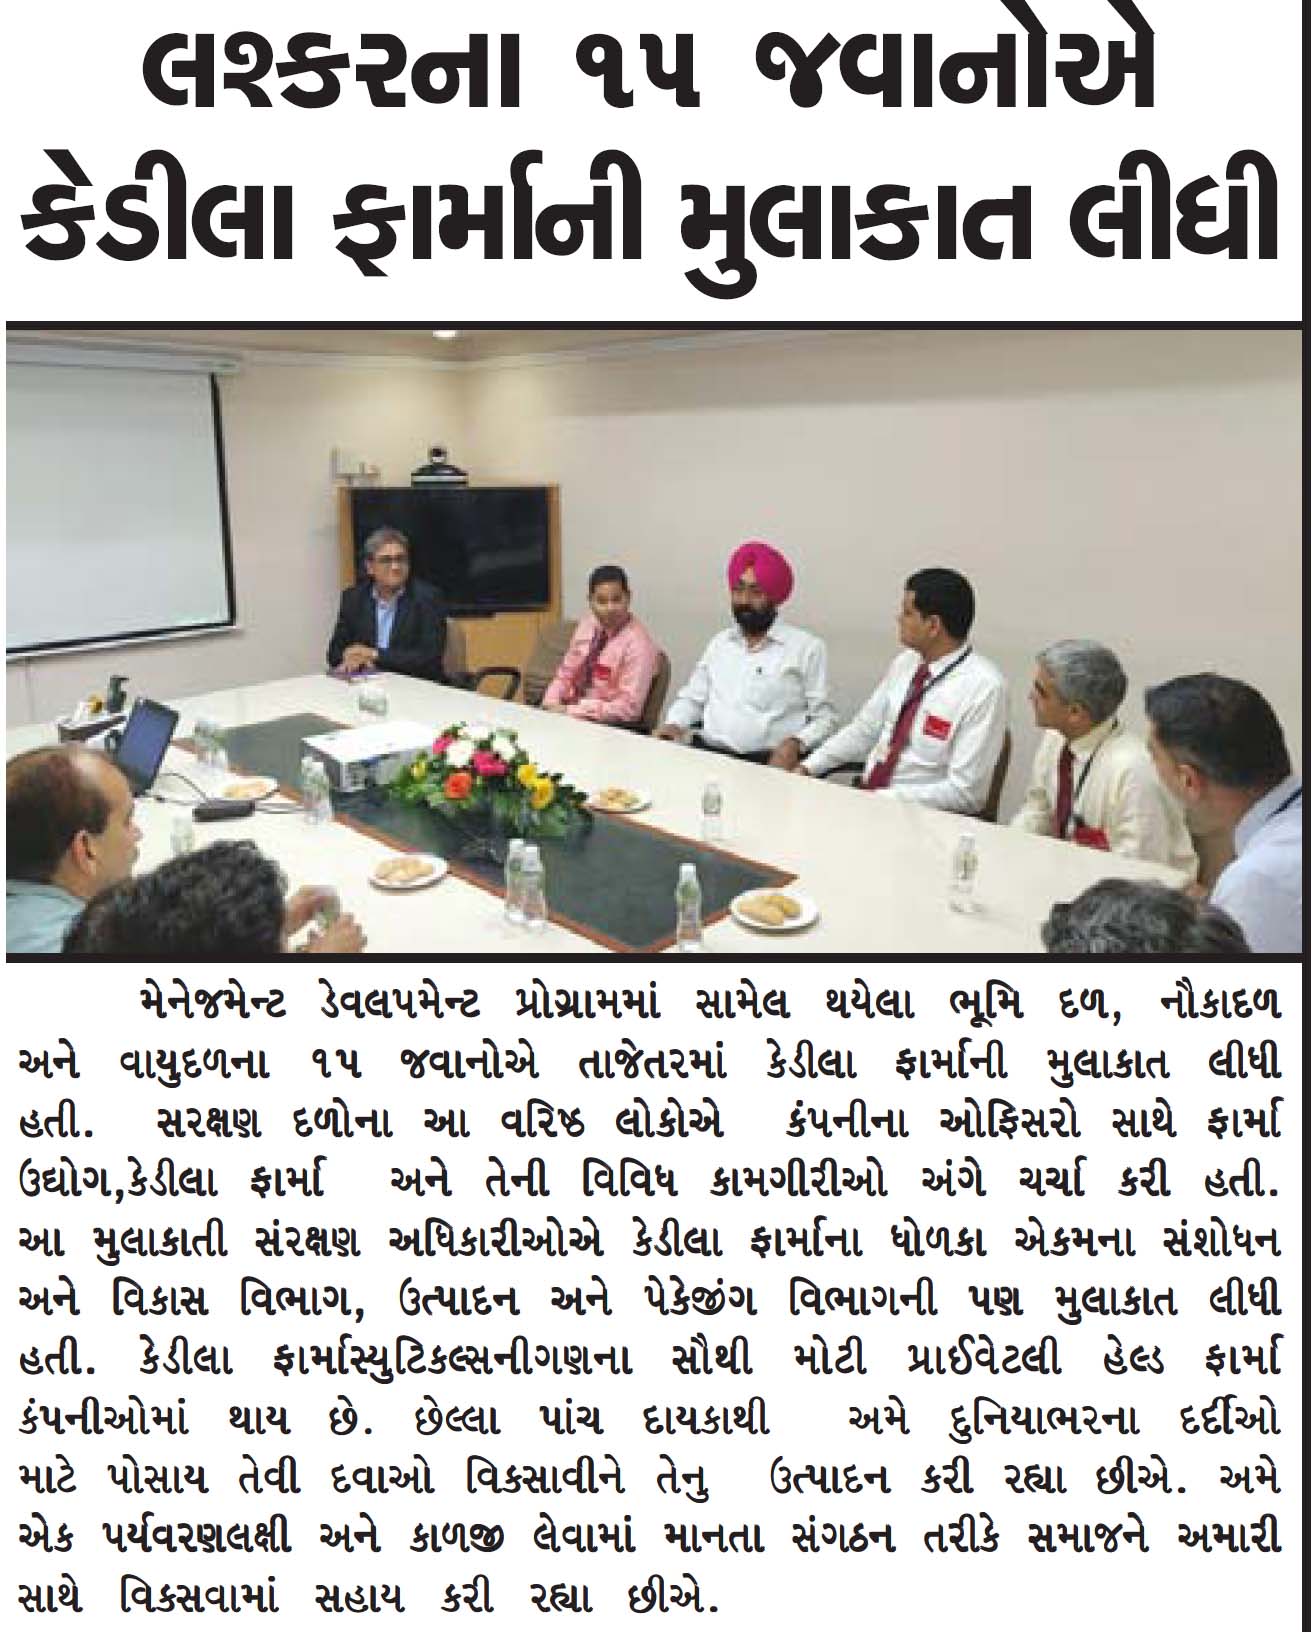 Surykaal Coverage